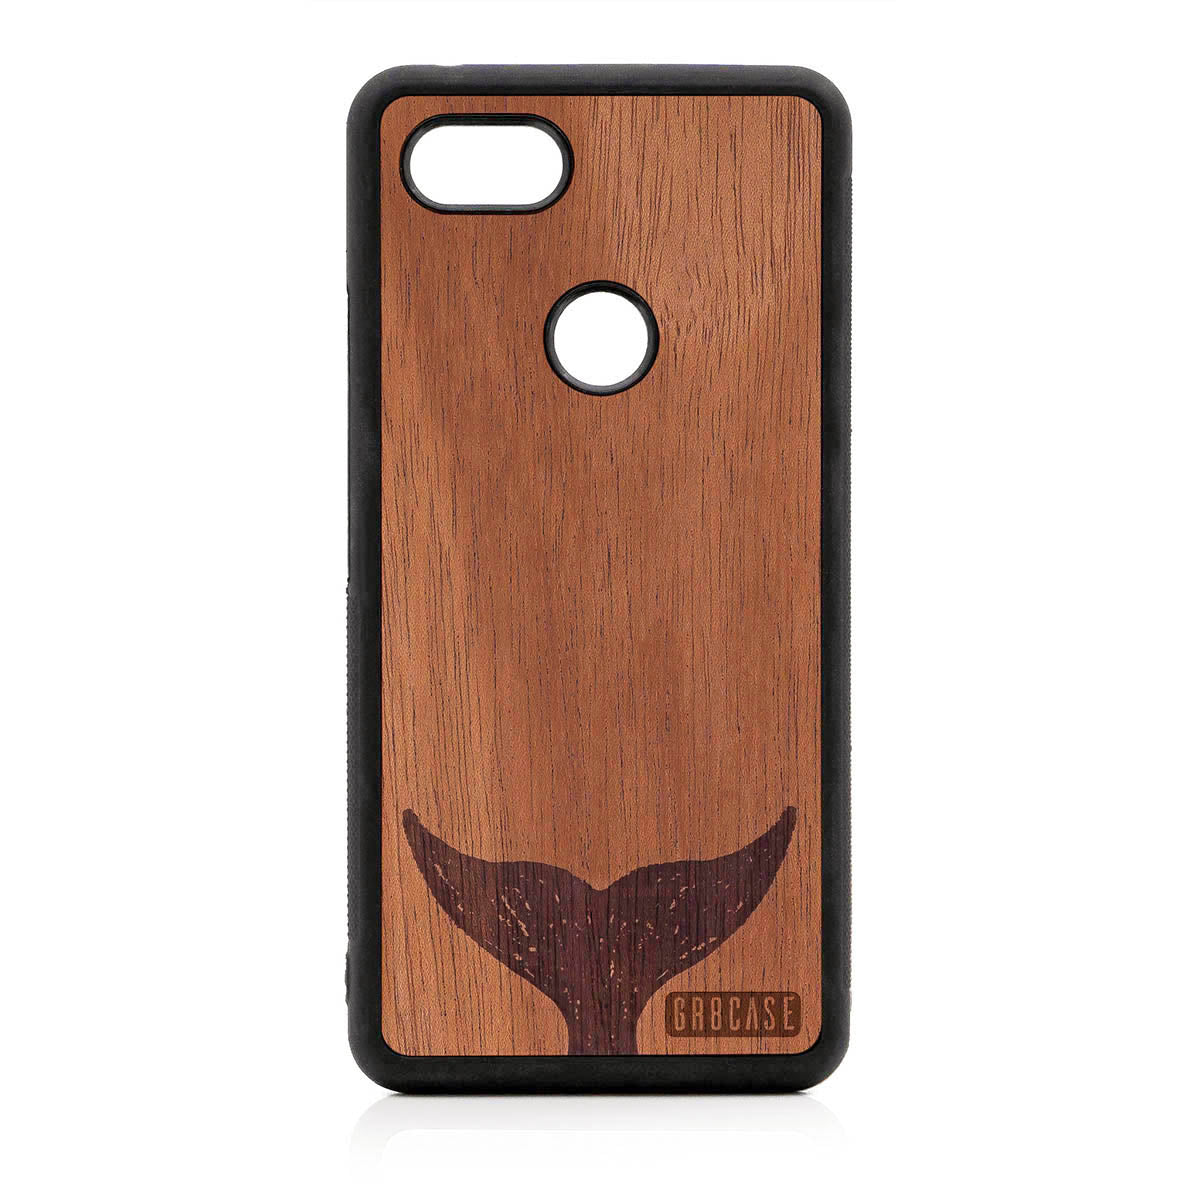 Whale Tail Design Wood Case For Google Pixel 3 XL